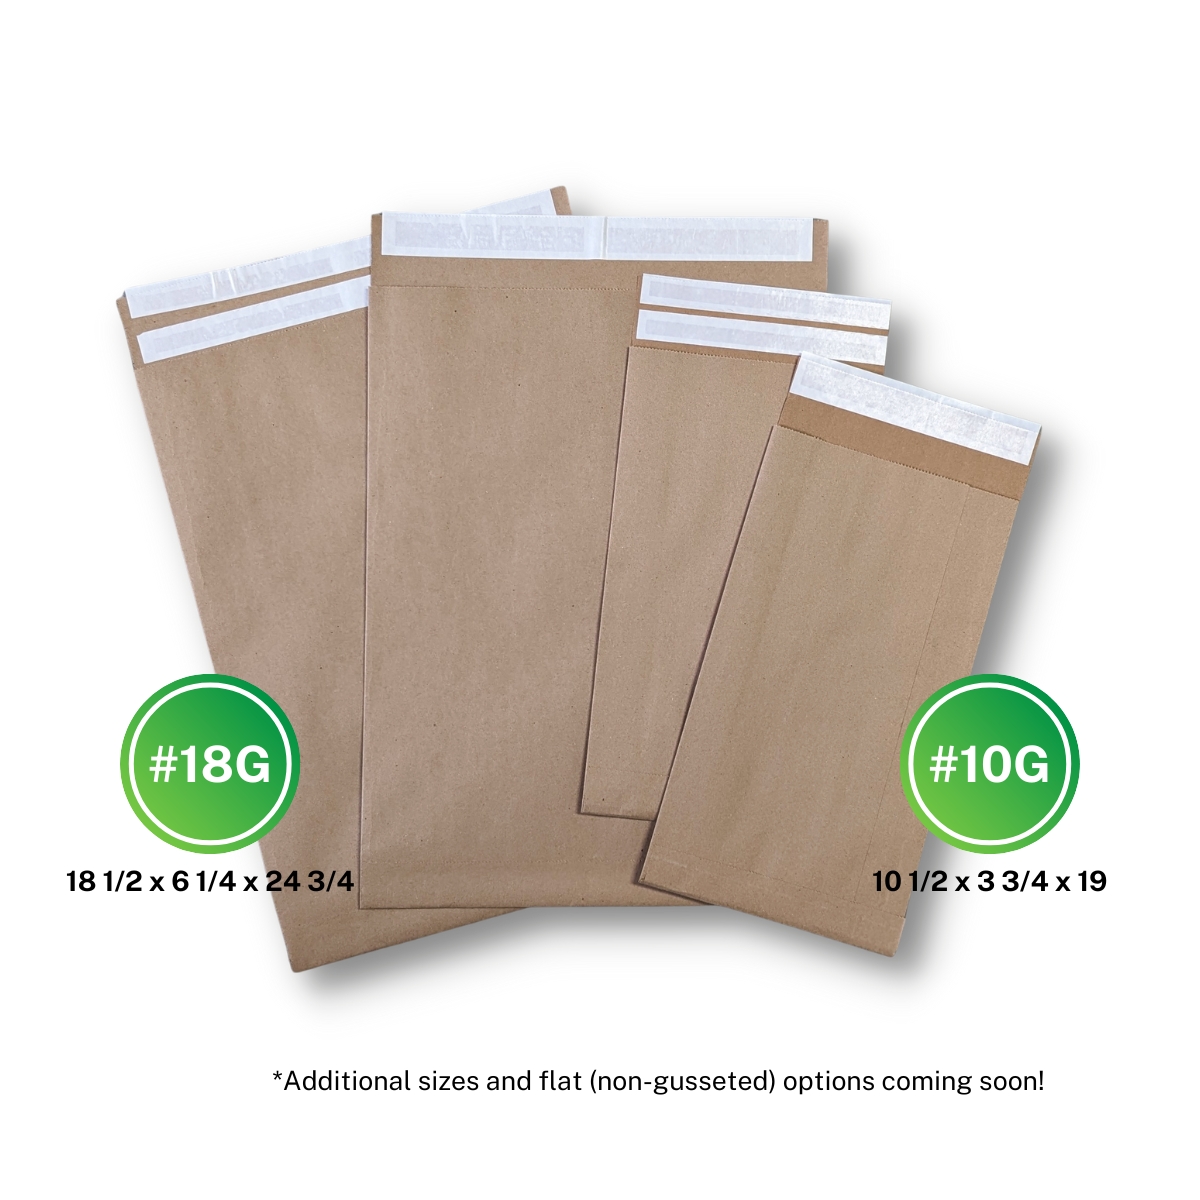 Eco-Natural Lite® Paper Shipping Bag sizes available from Wisconsin Converting, Inc. of Green Bay, Wisconsin.